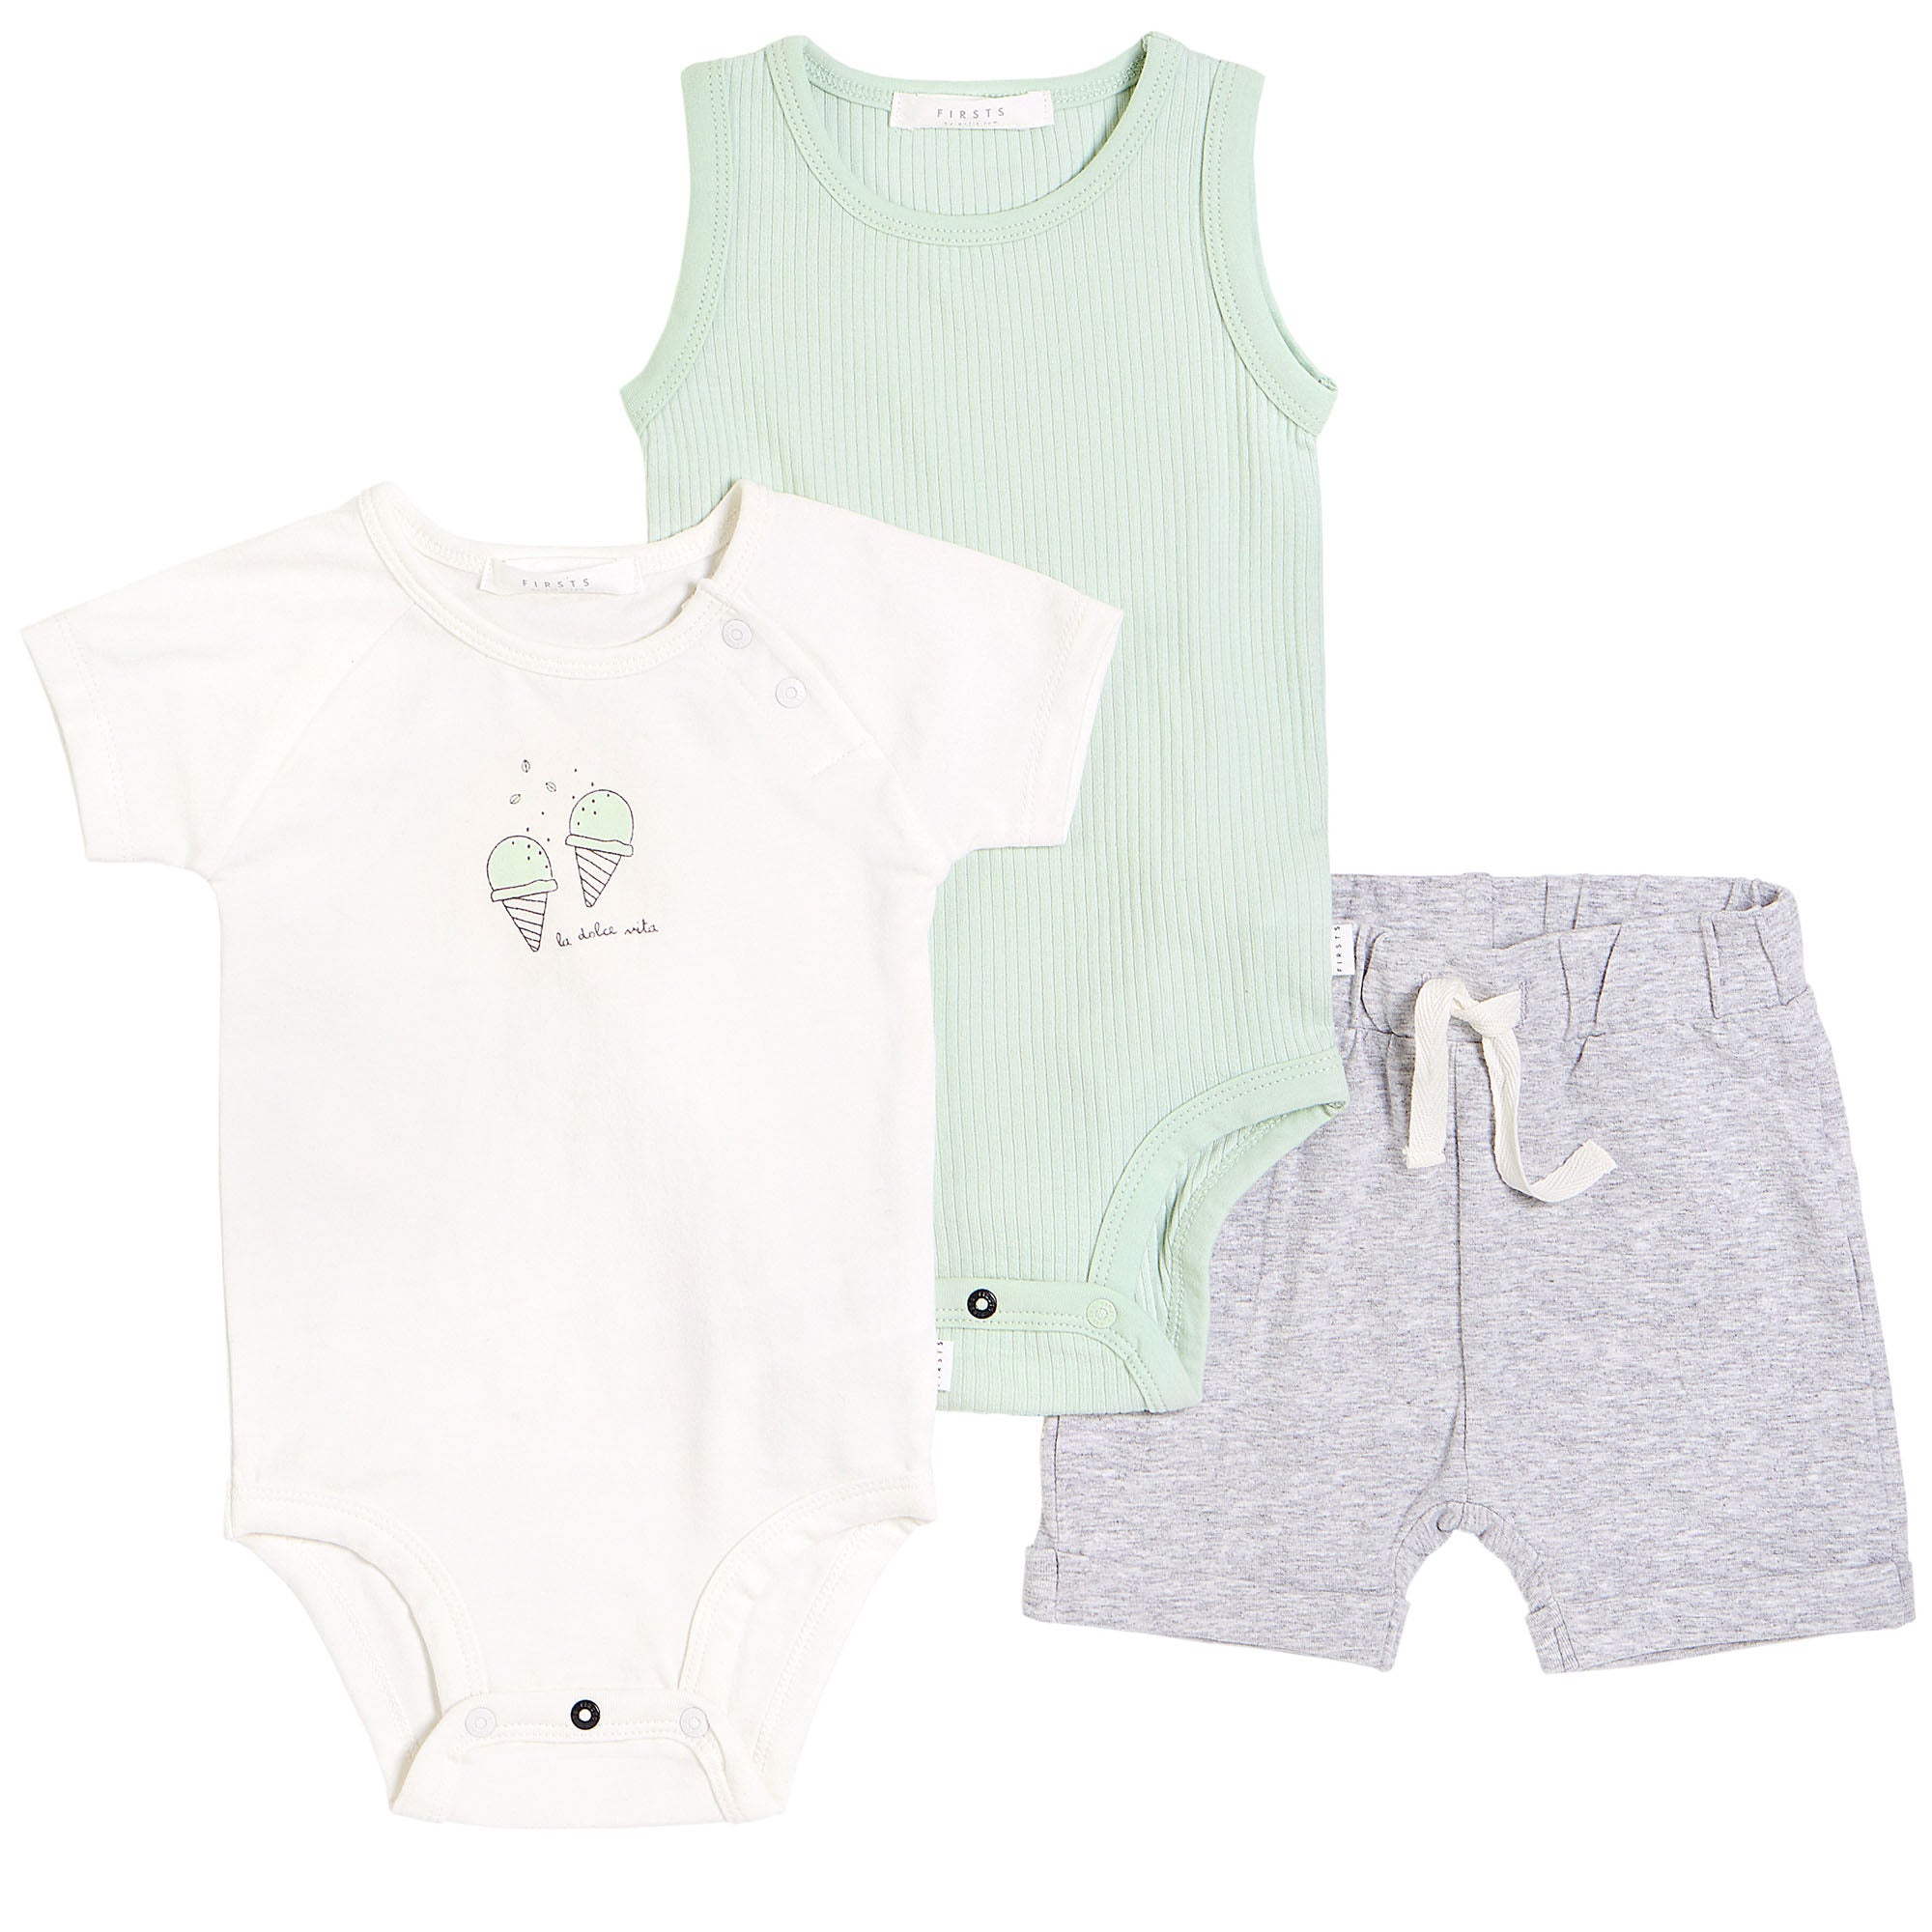 FIRSTS by Petit Lem Organic Baby Summer Outfit Set (3-Piece) - Gelato